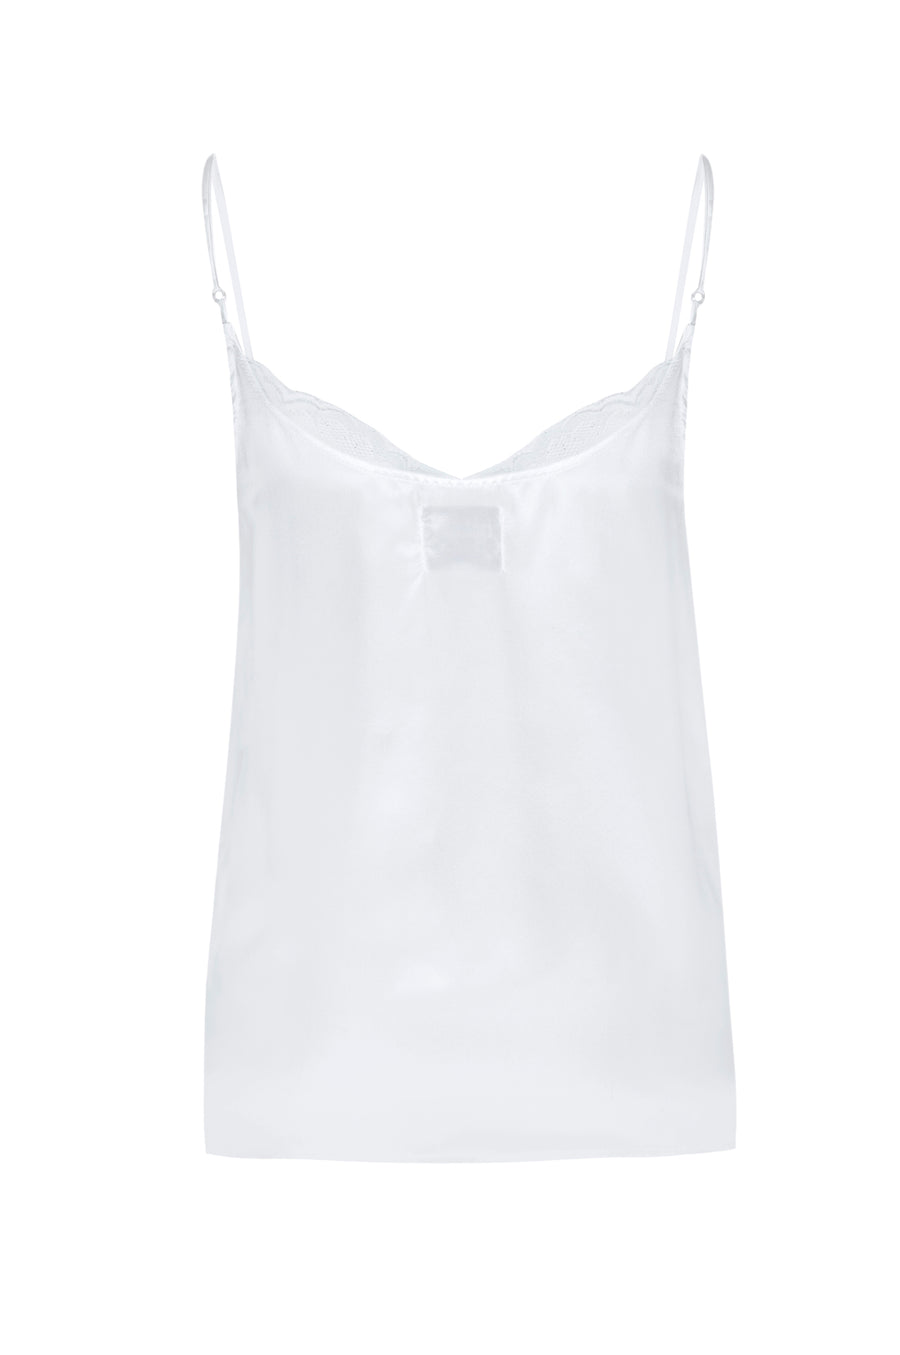 Silk Charmeuse 'August' Tank with Lace: Ivory